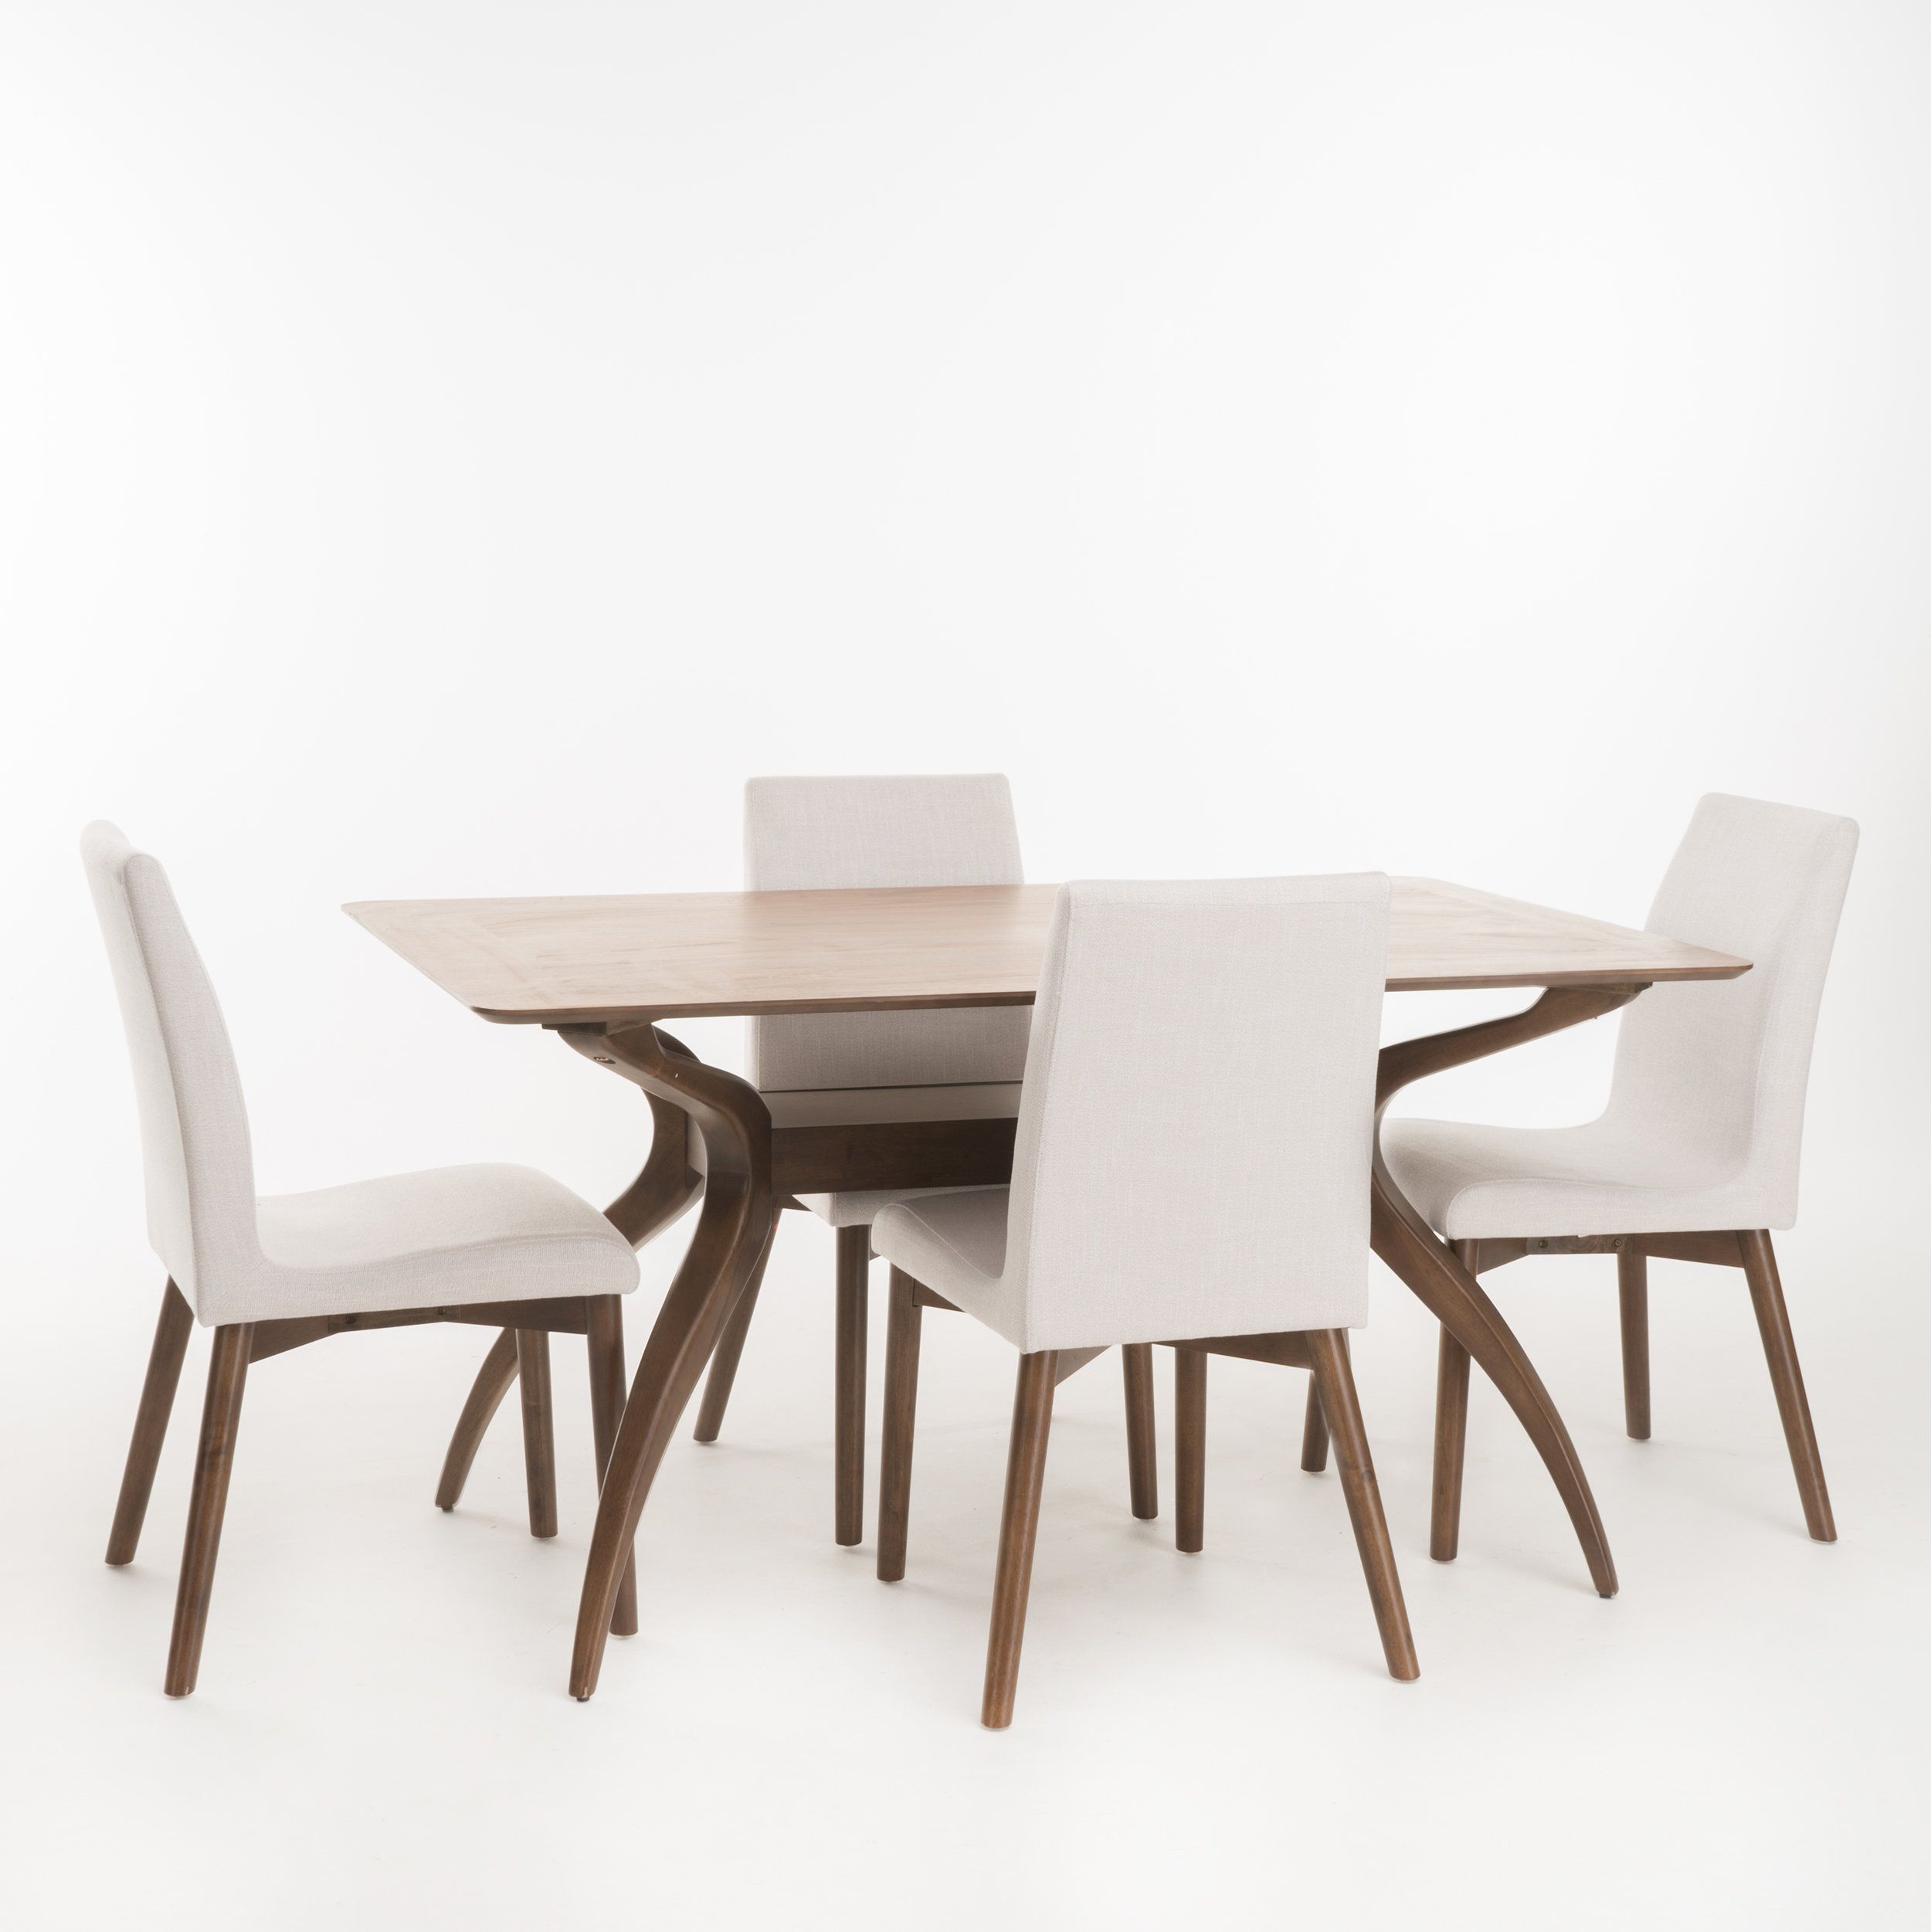 Joss & Main In Best And Newest Liles 5 Piece Breakfast Nook Dining Sets (View 5 of 20)